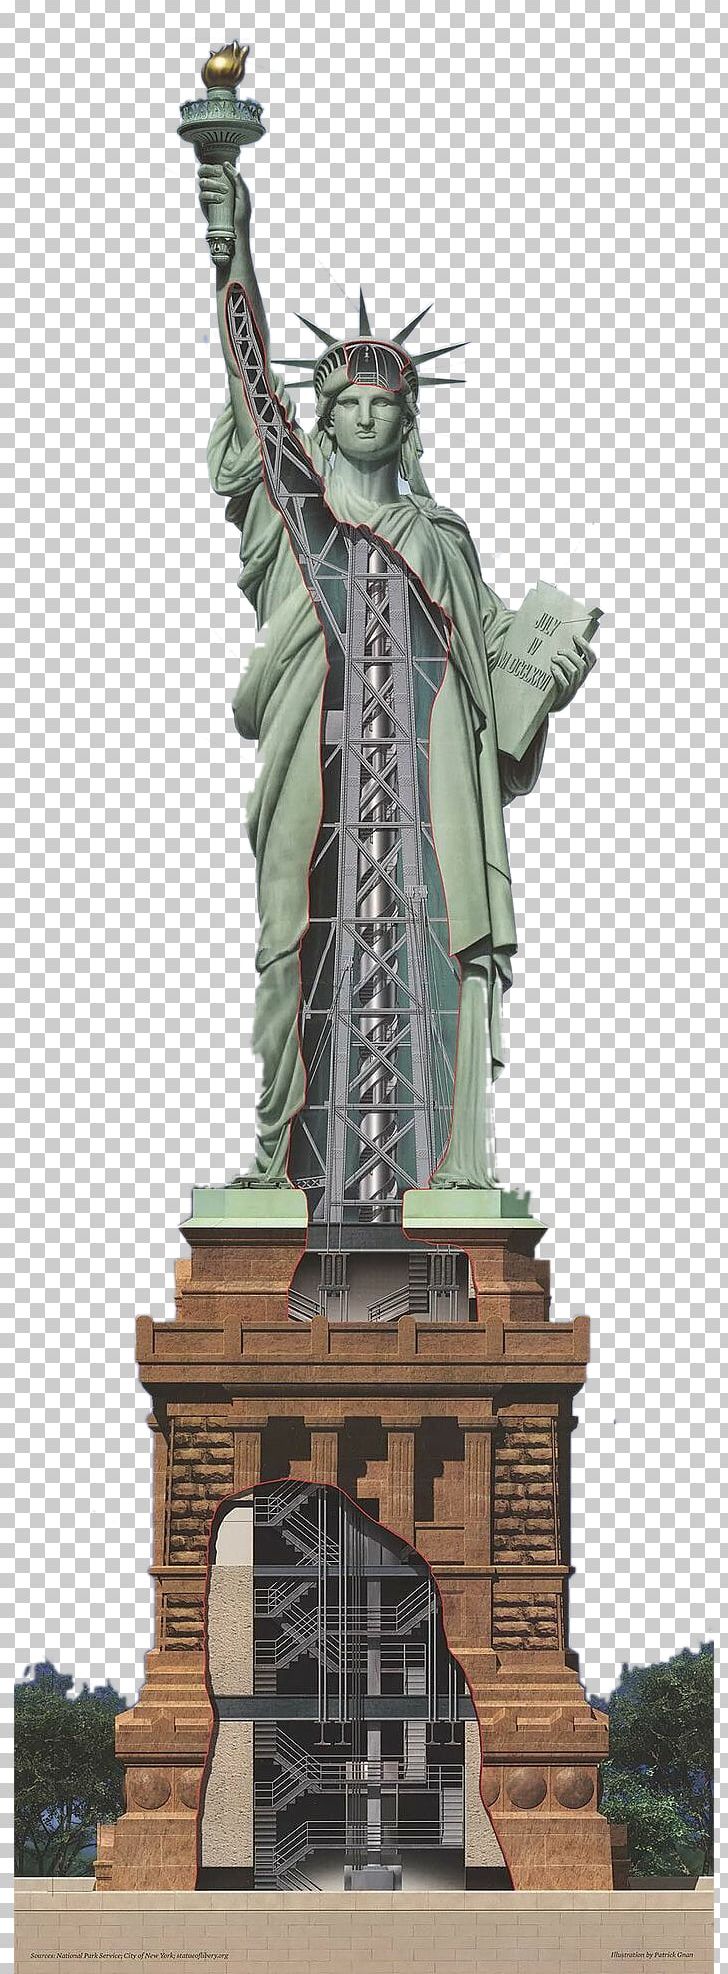 Statue Of Liberty One World Trade Center Hudson River Ellis Island The New Colossus PNG, Clipart, Artwork, Buddha Statue, Decorative, Decorative Pattern, Emma Lazarus Free PNG Download